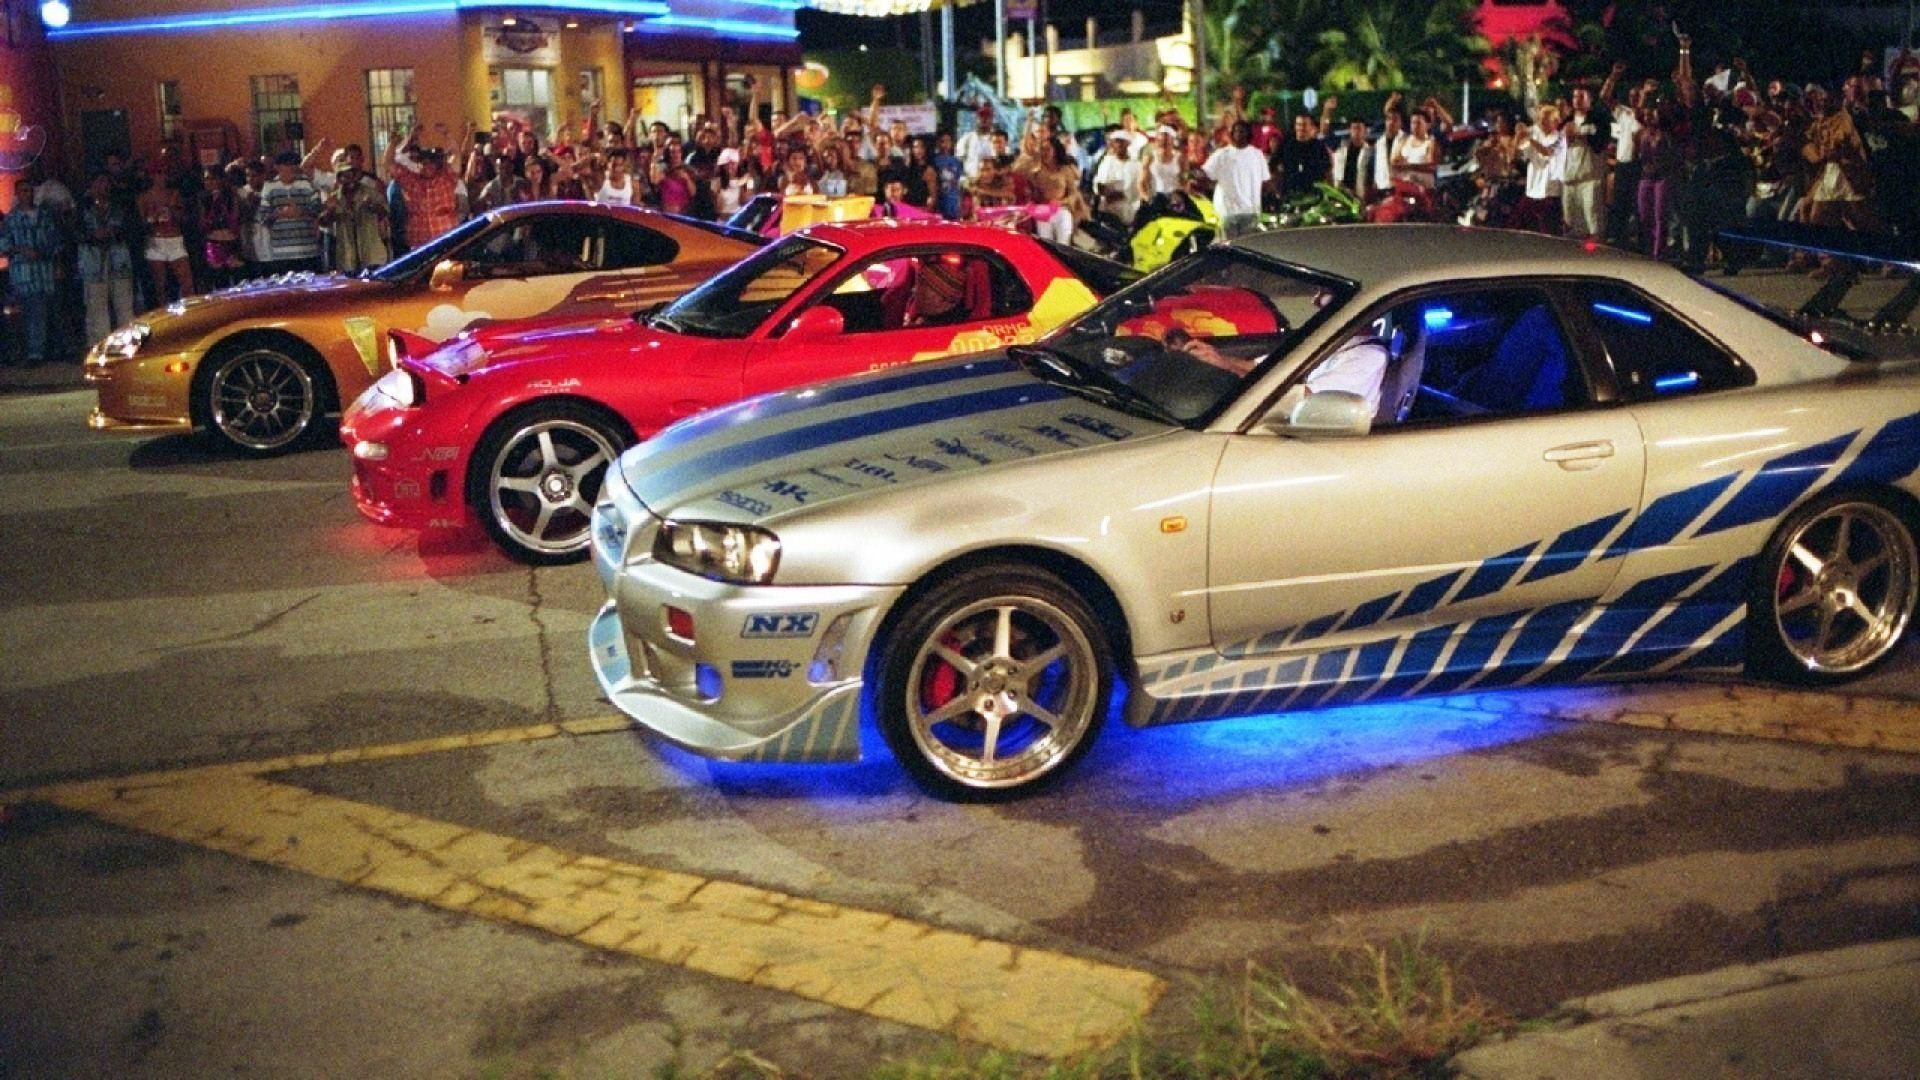 Street racing in Fast and Furious movies